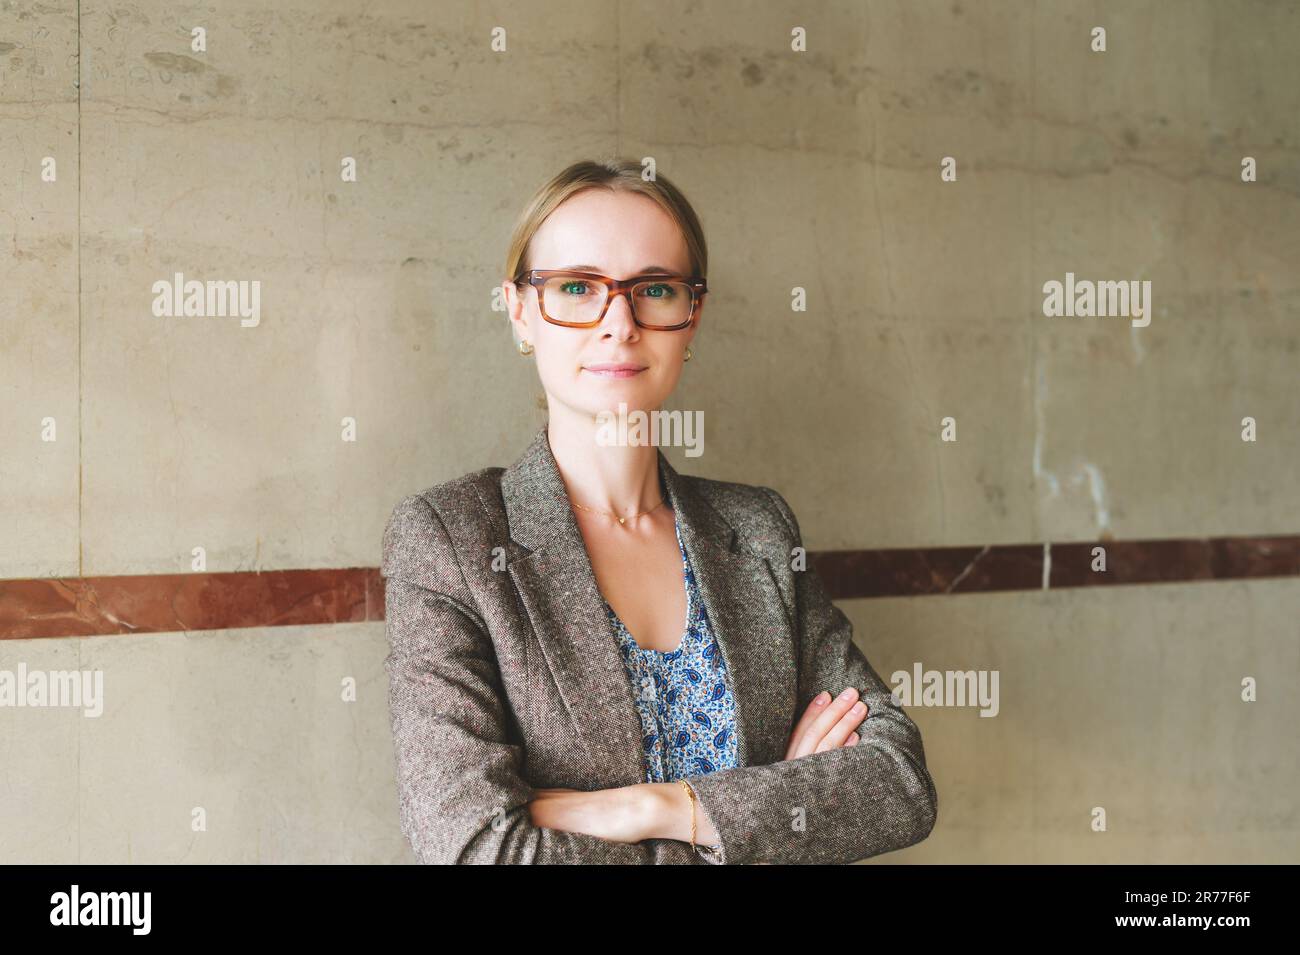 Portrait of young 35 year old woman wearing brown eyeglasses and jacket Stock Photo